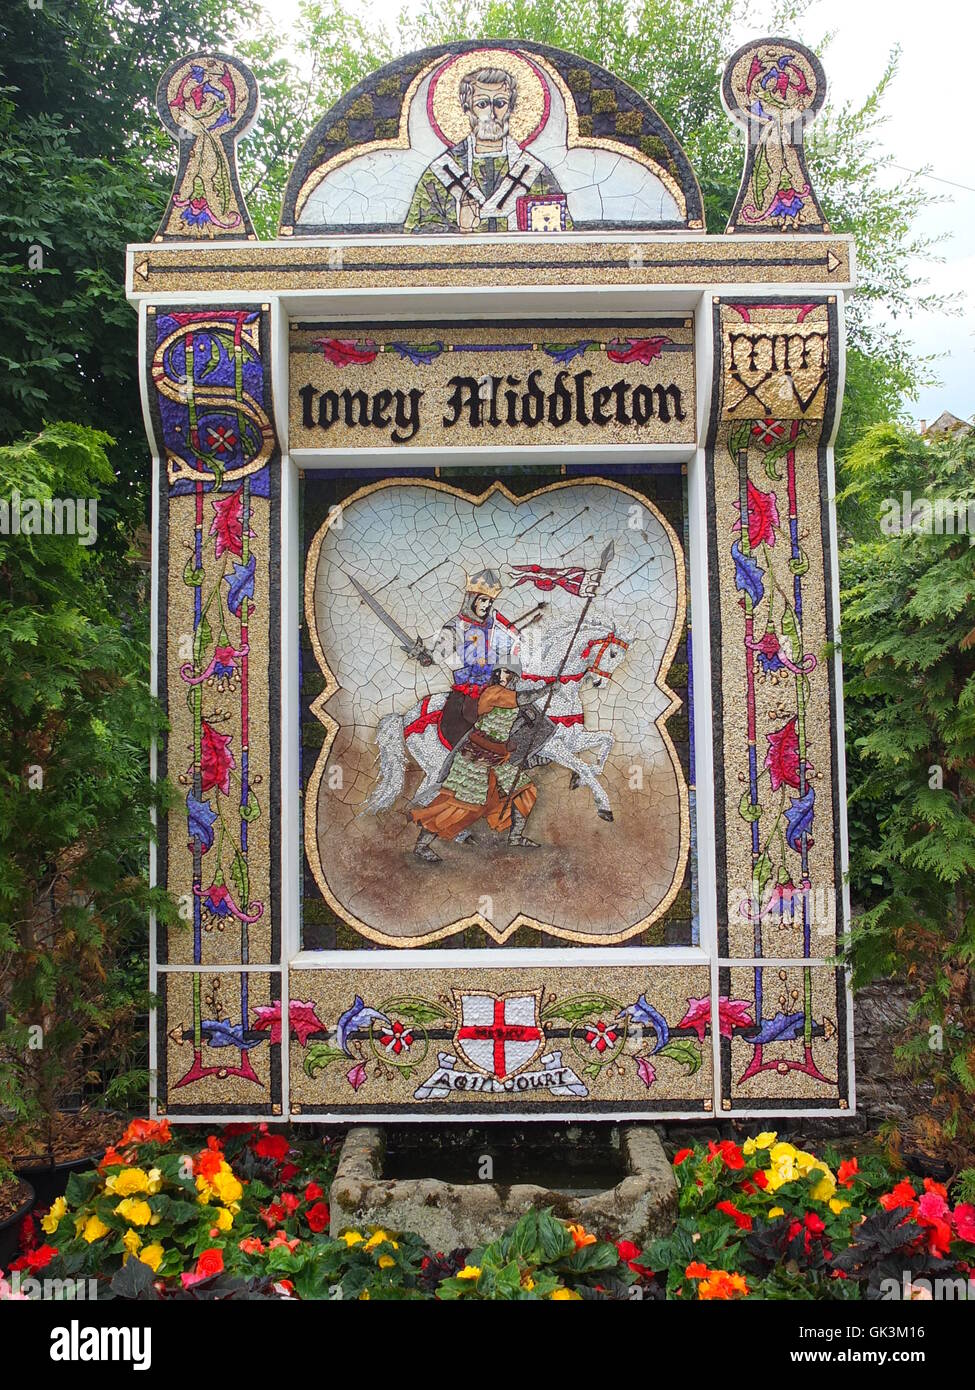 Stoney Middleton well dressing design 2015 with an Agincourt theme marking the 600th anniversary of the battle. Stock Photo